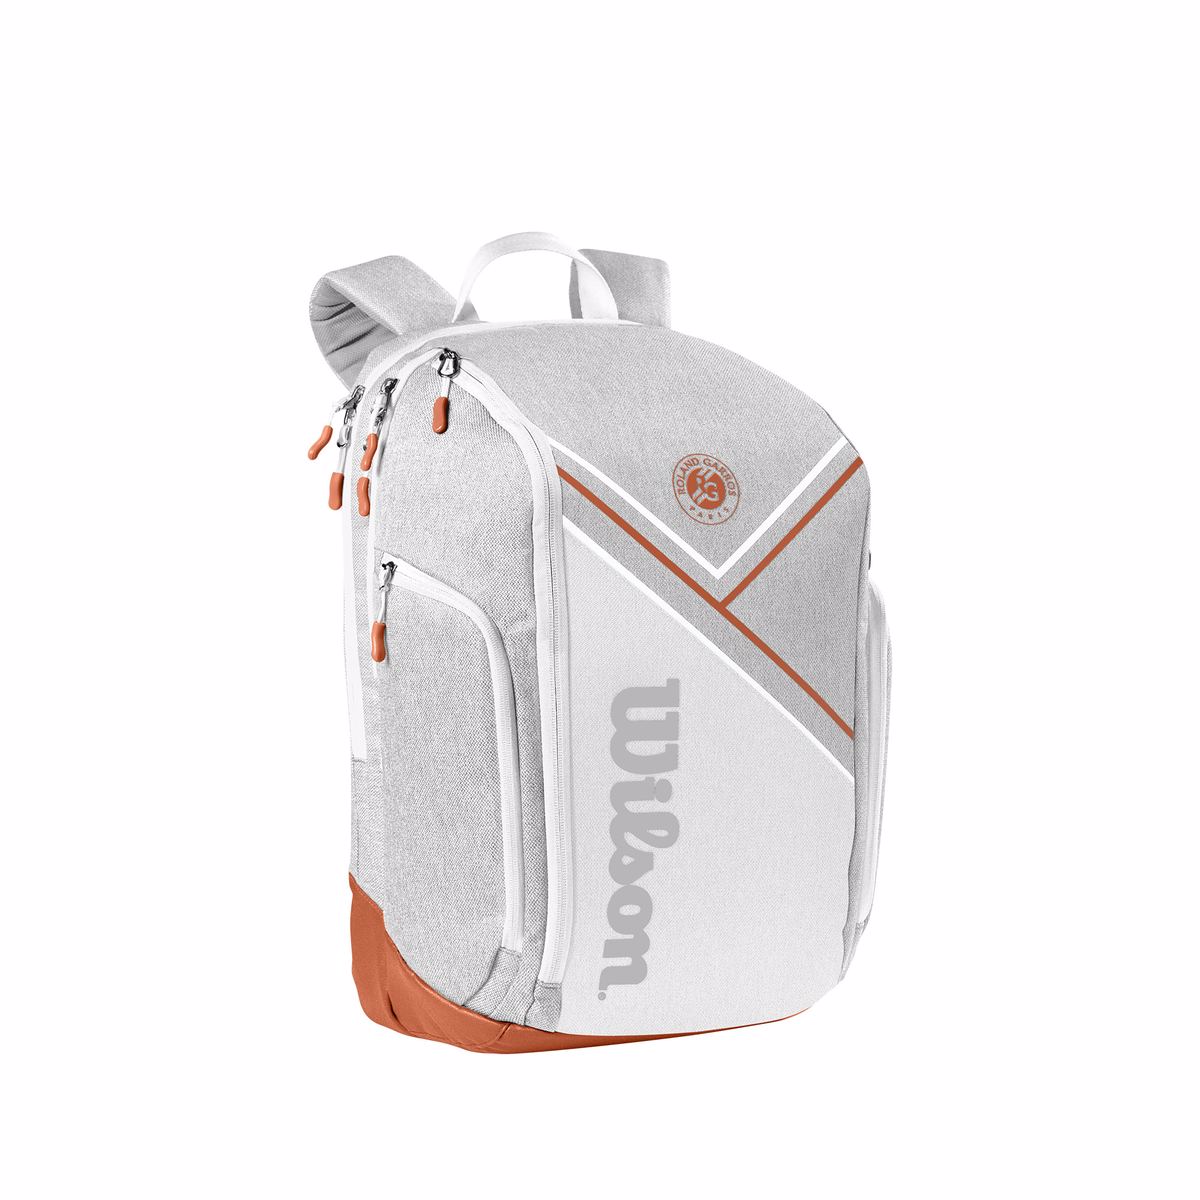 WR8018302_0_Roland_Garros_Super_Tour_Backpack_Clay_WH.png.high-res_1200x1200